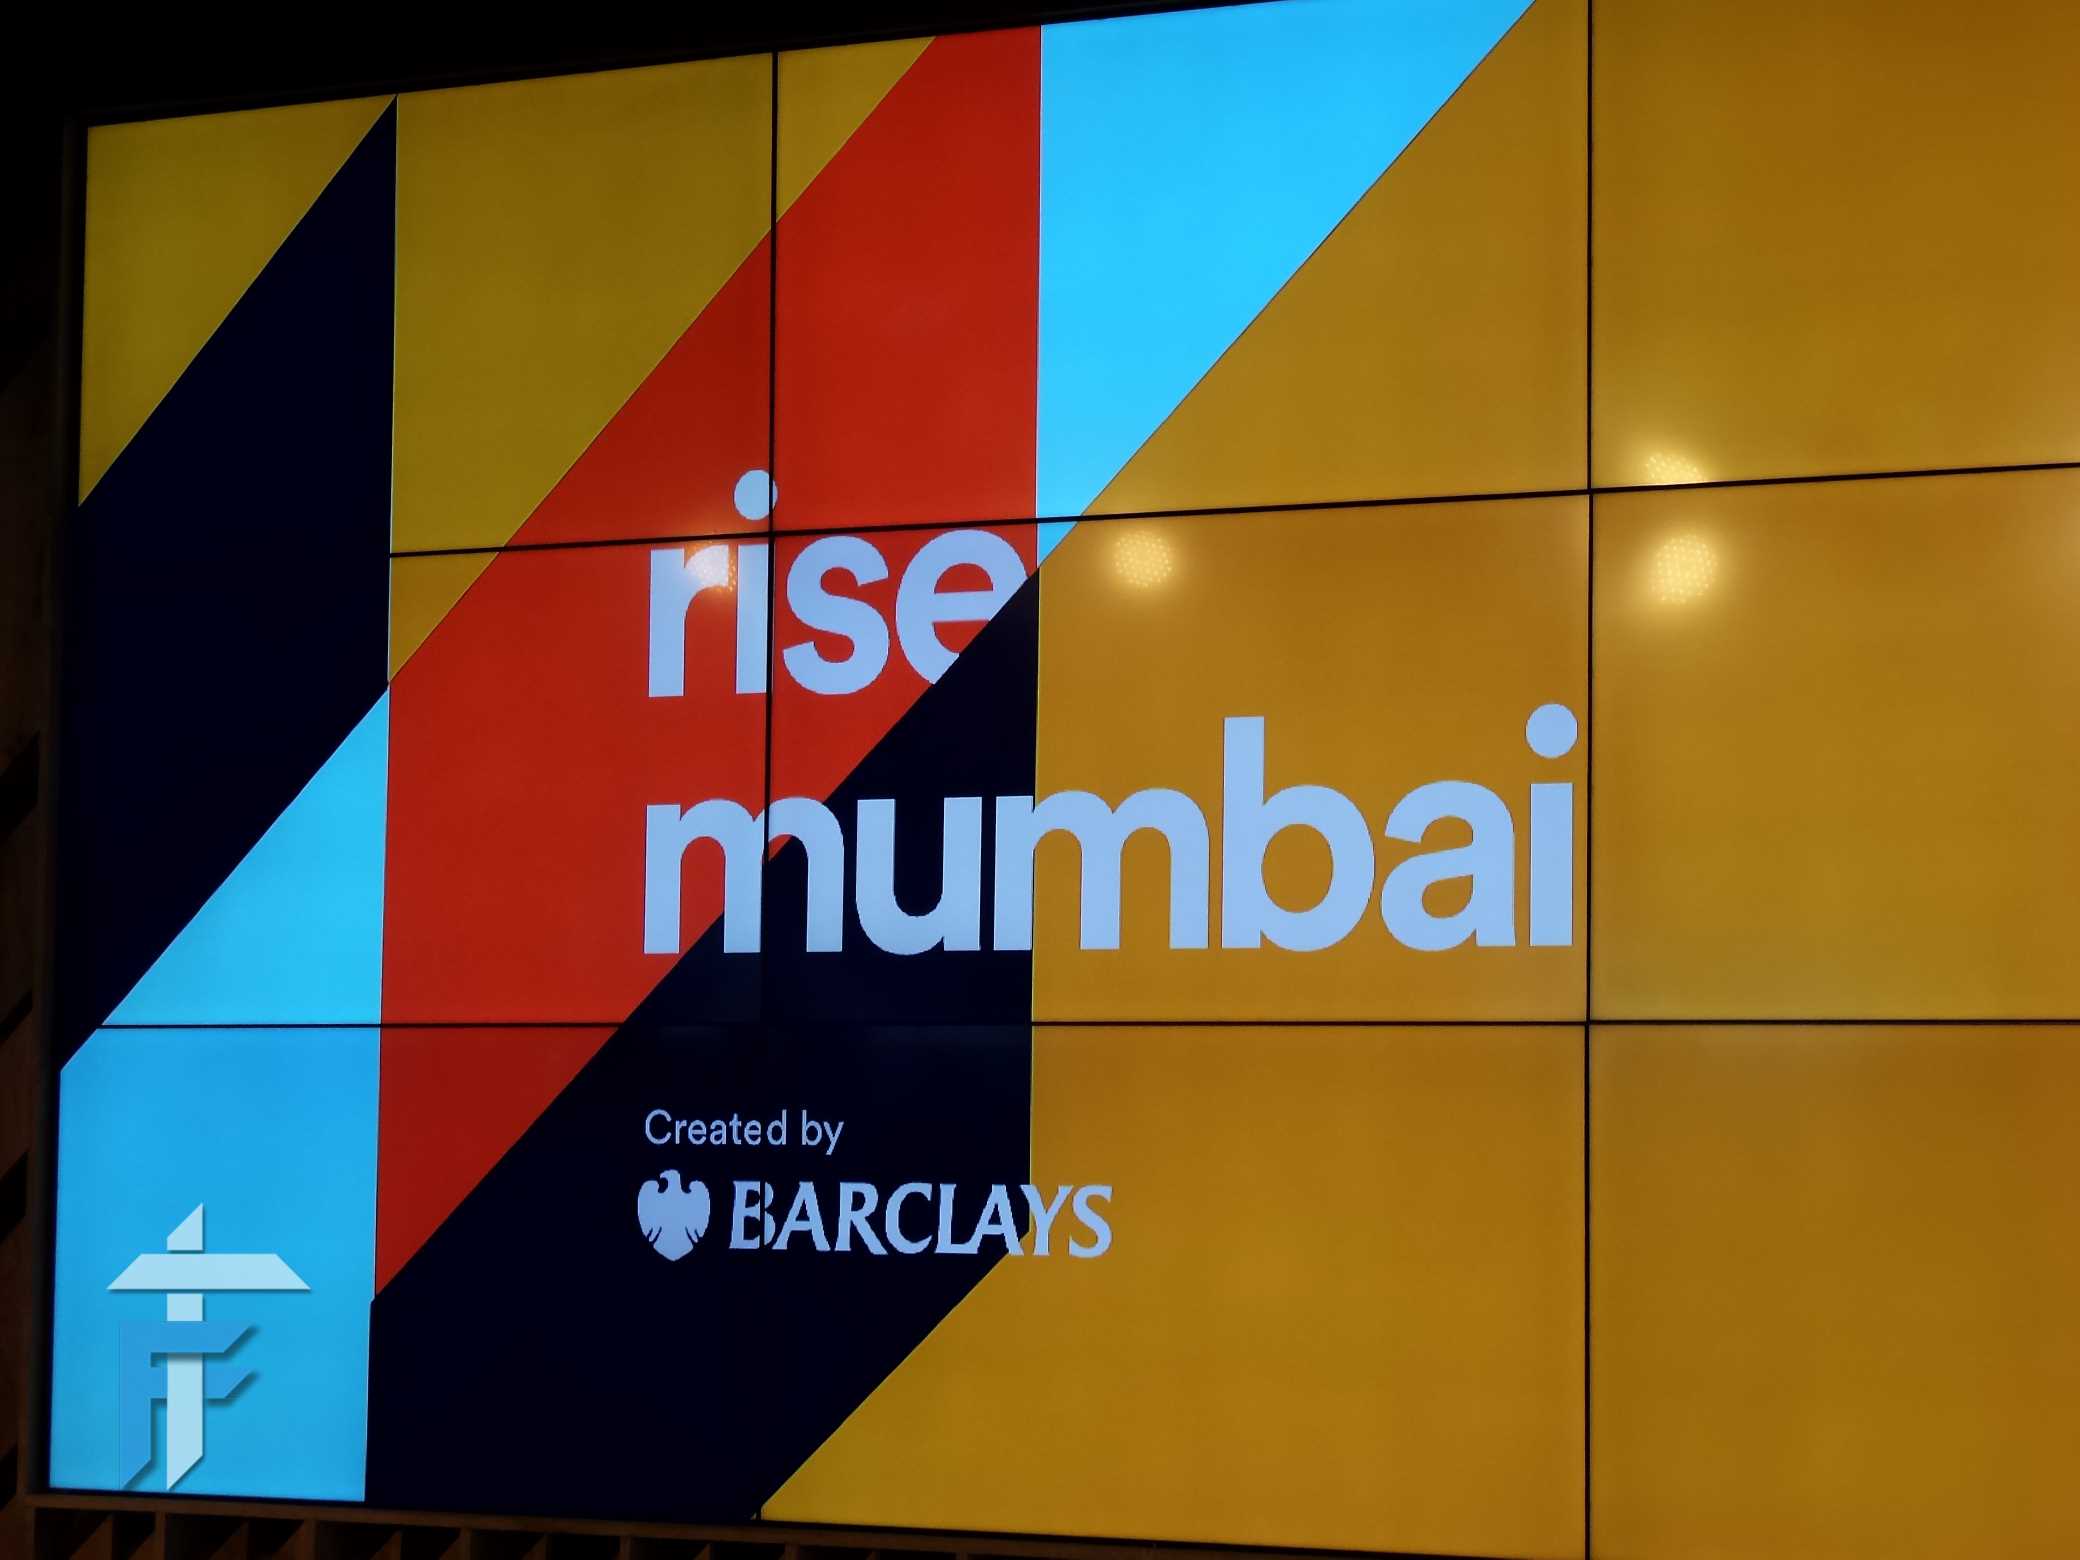 Barclays launches Rise Mumbai, the new home for fintech in India